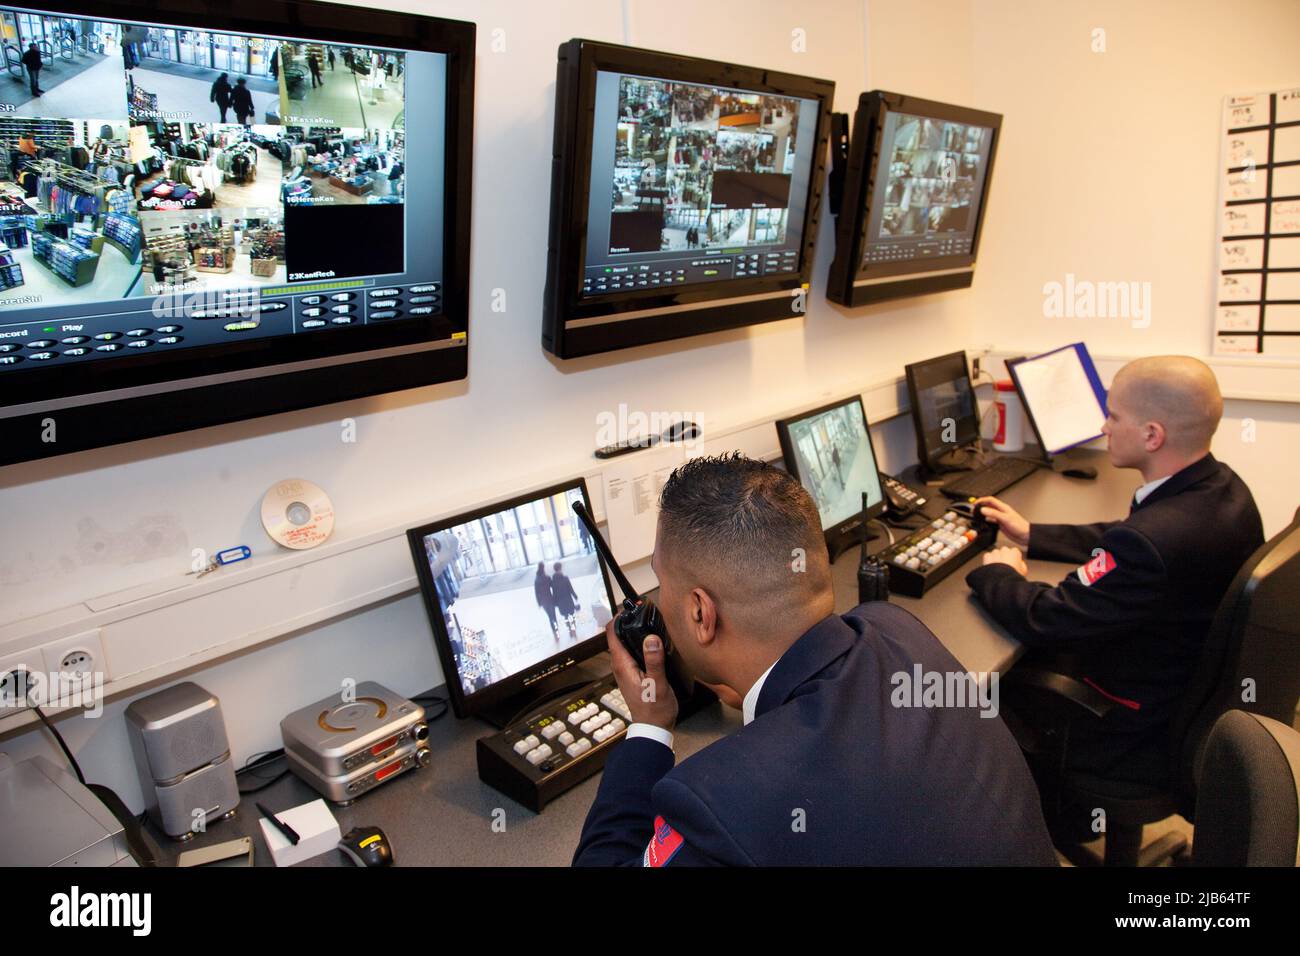 Netherlands Security Guards In A Big Shopping Mall Are Watching The Live Images From Cameras In